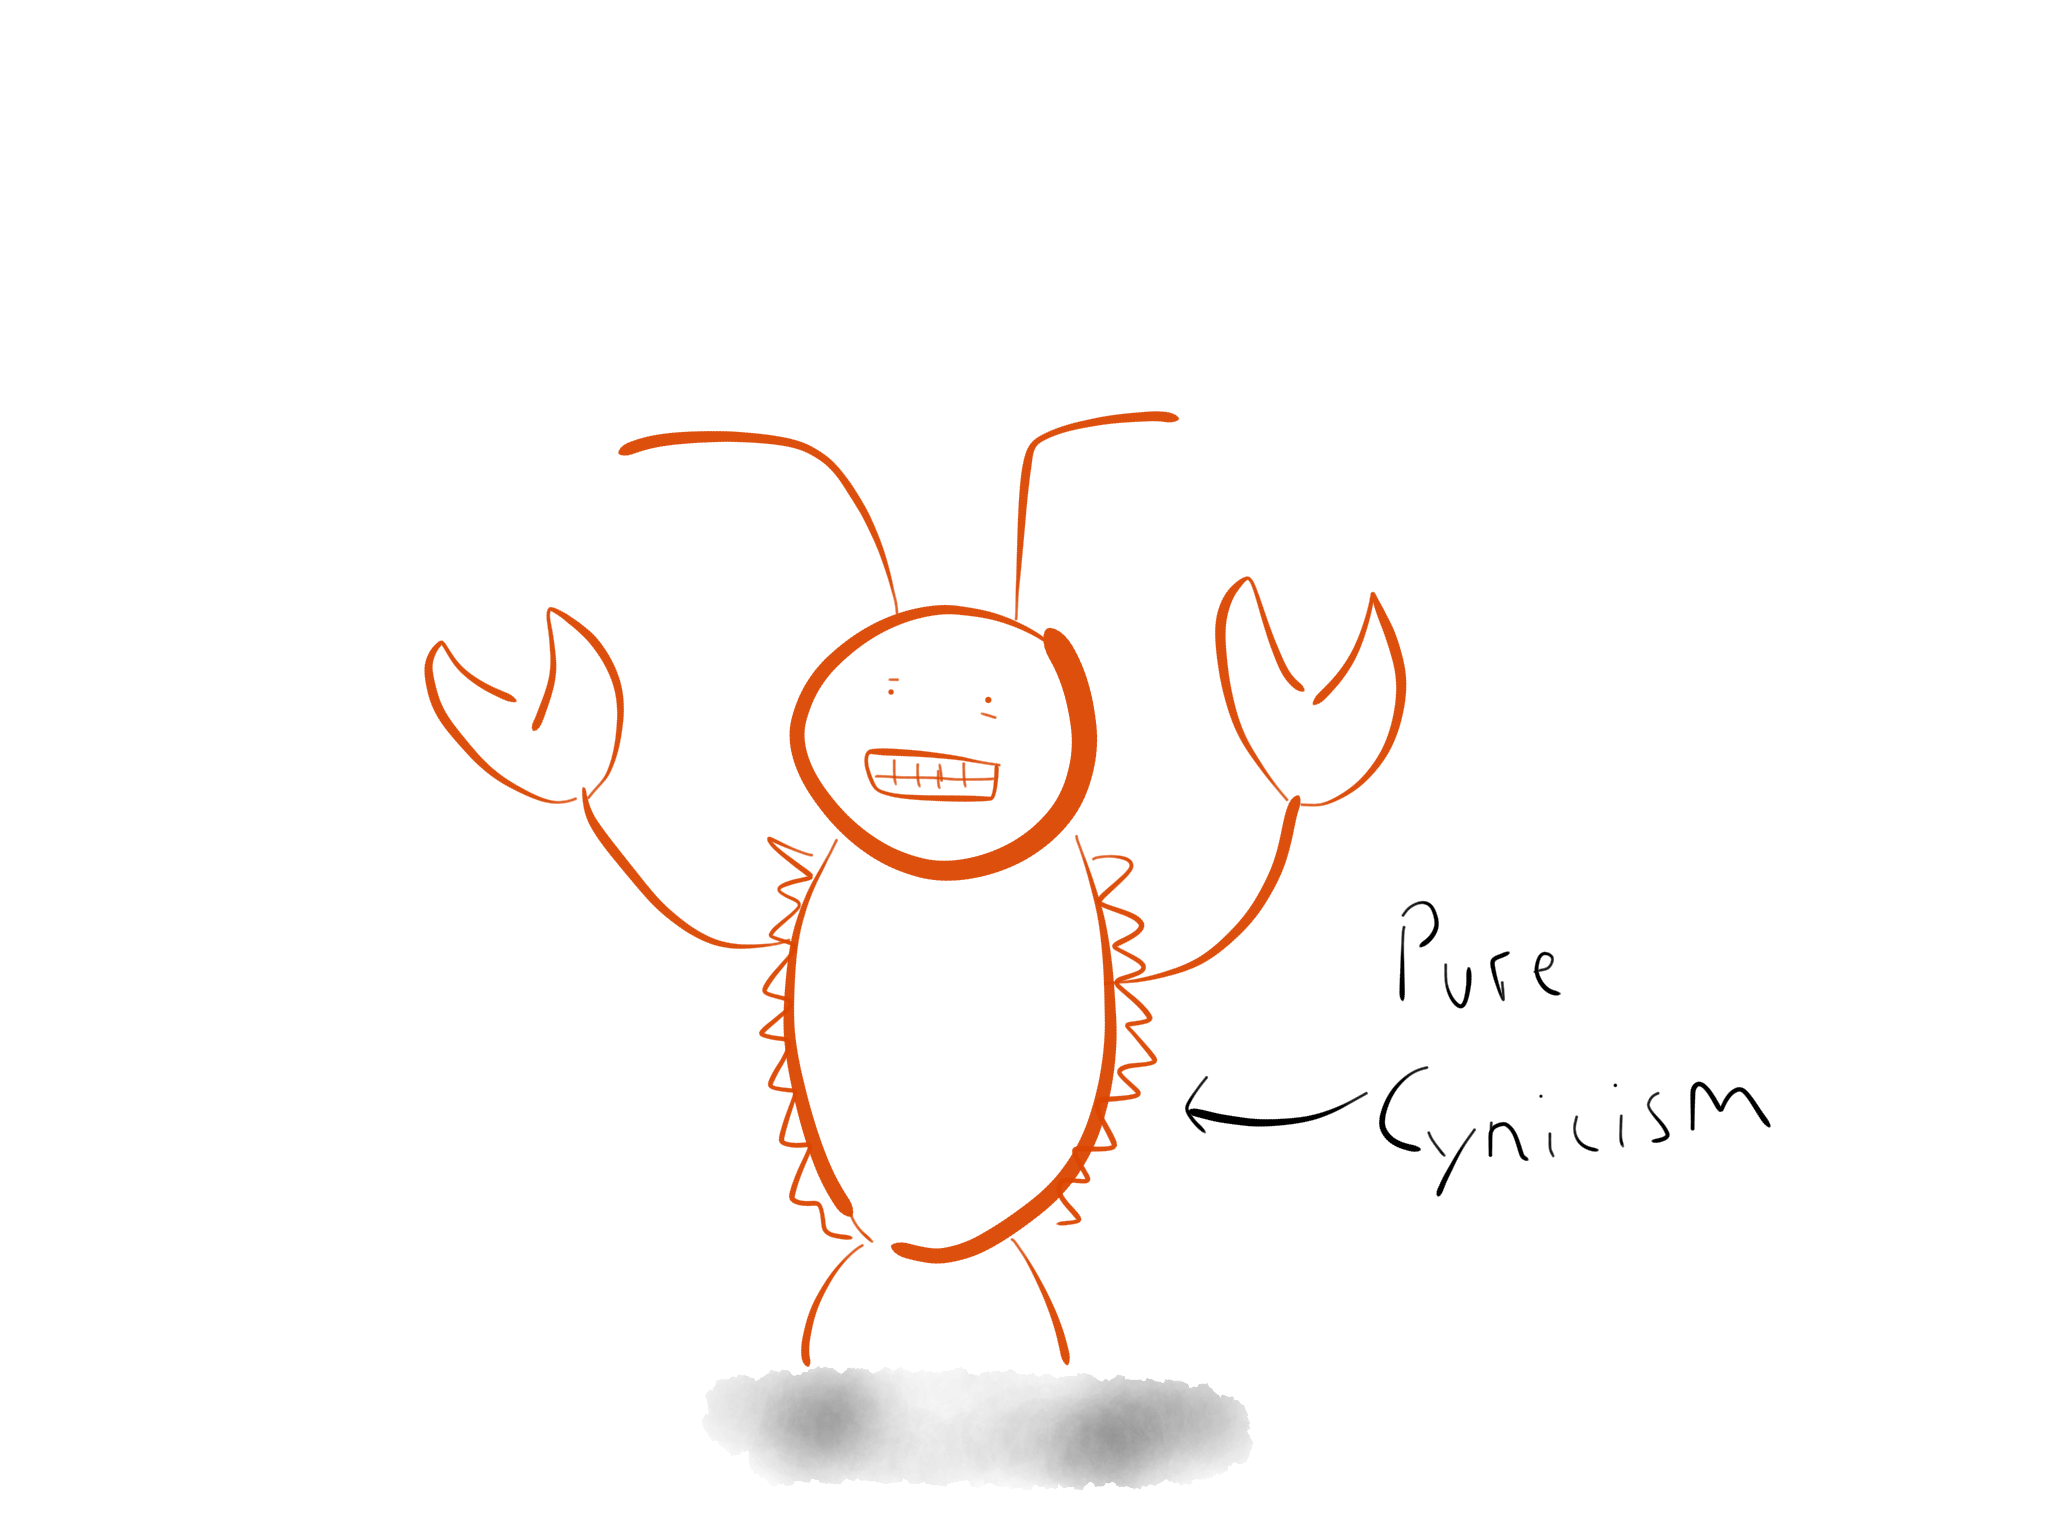 A lobster with armor made of cynicism